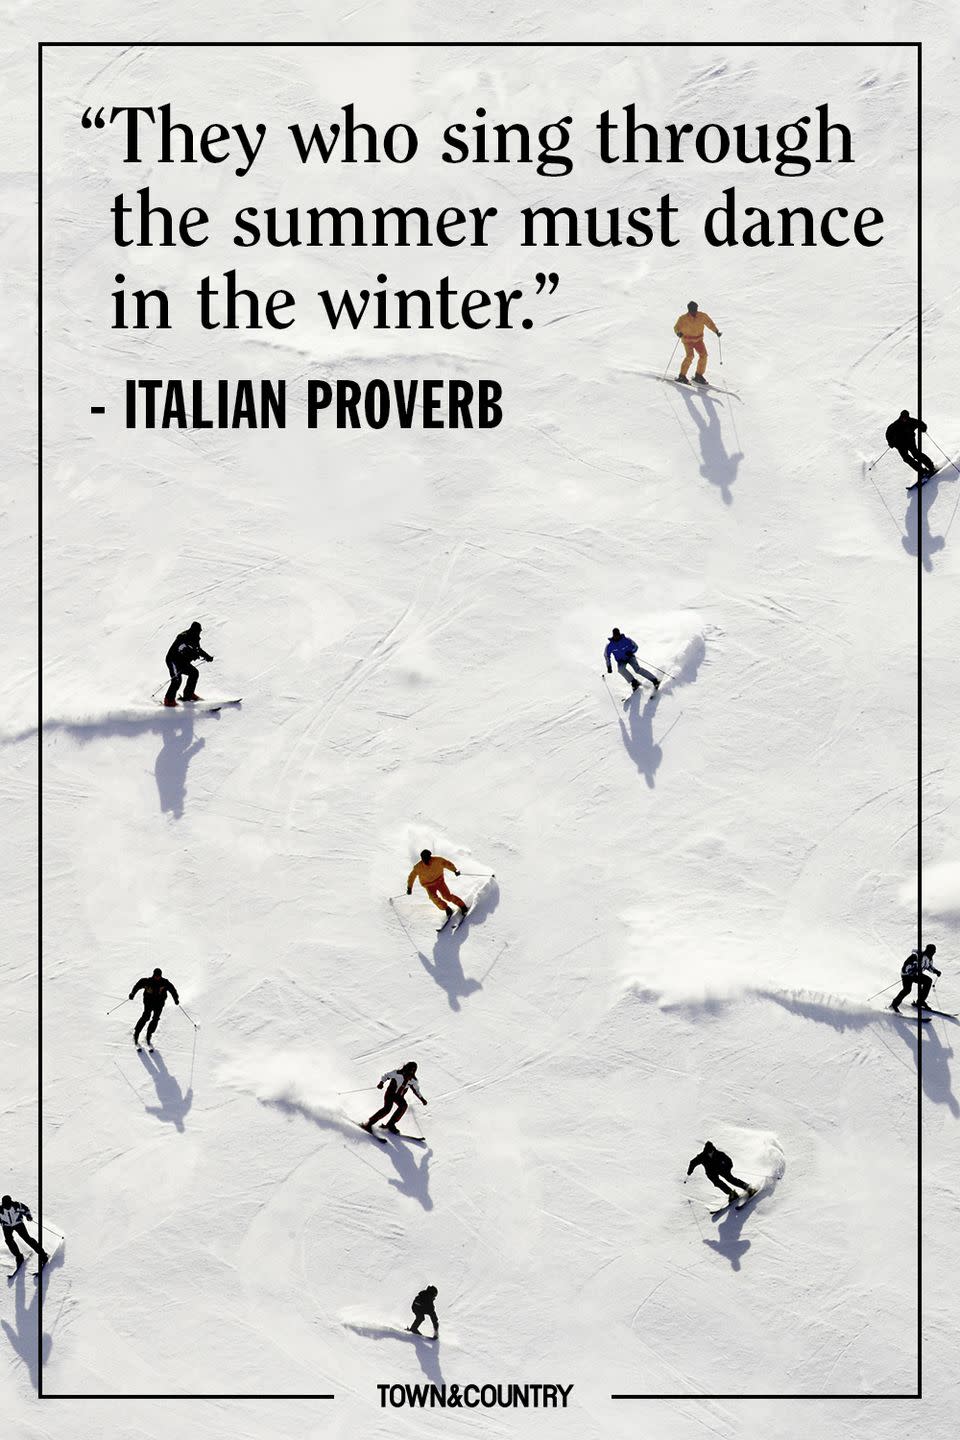 Quotes About Winter to Warm the Heart